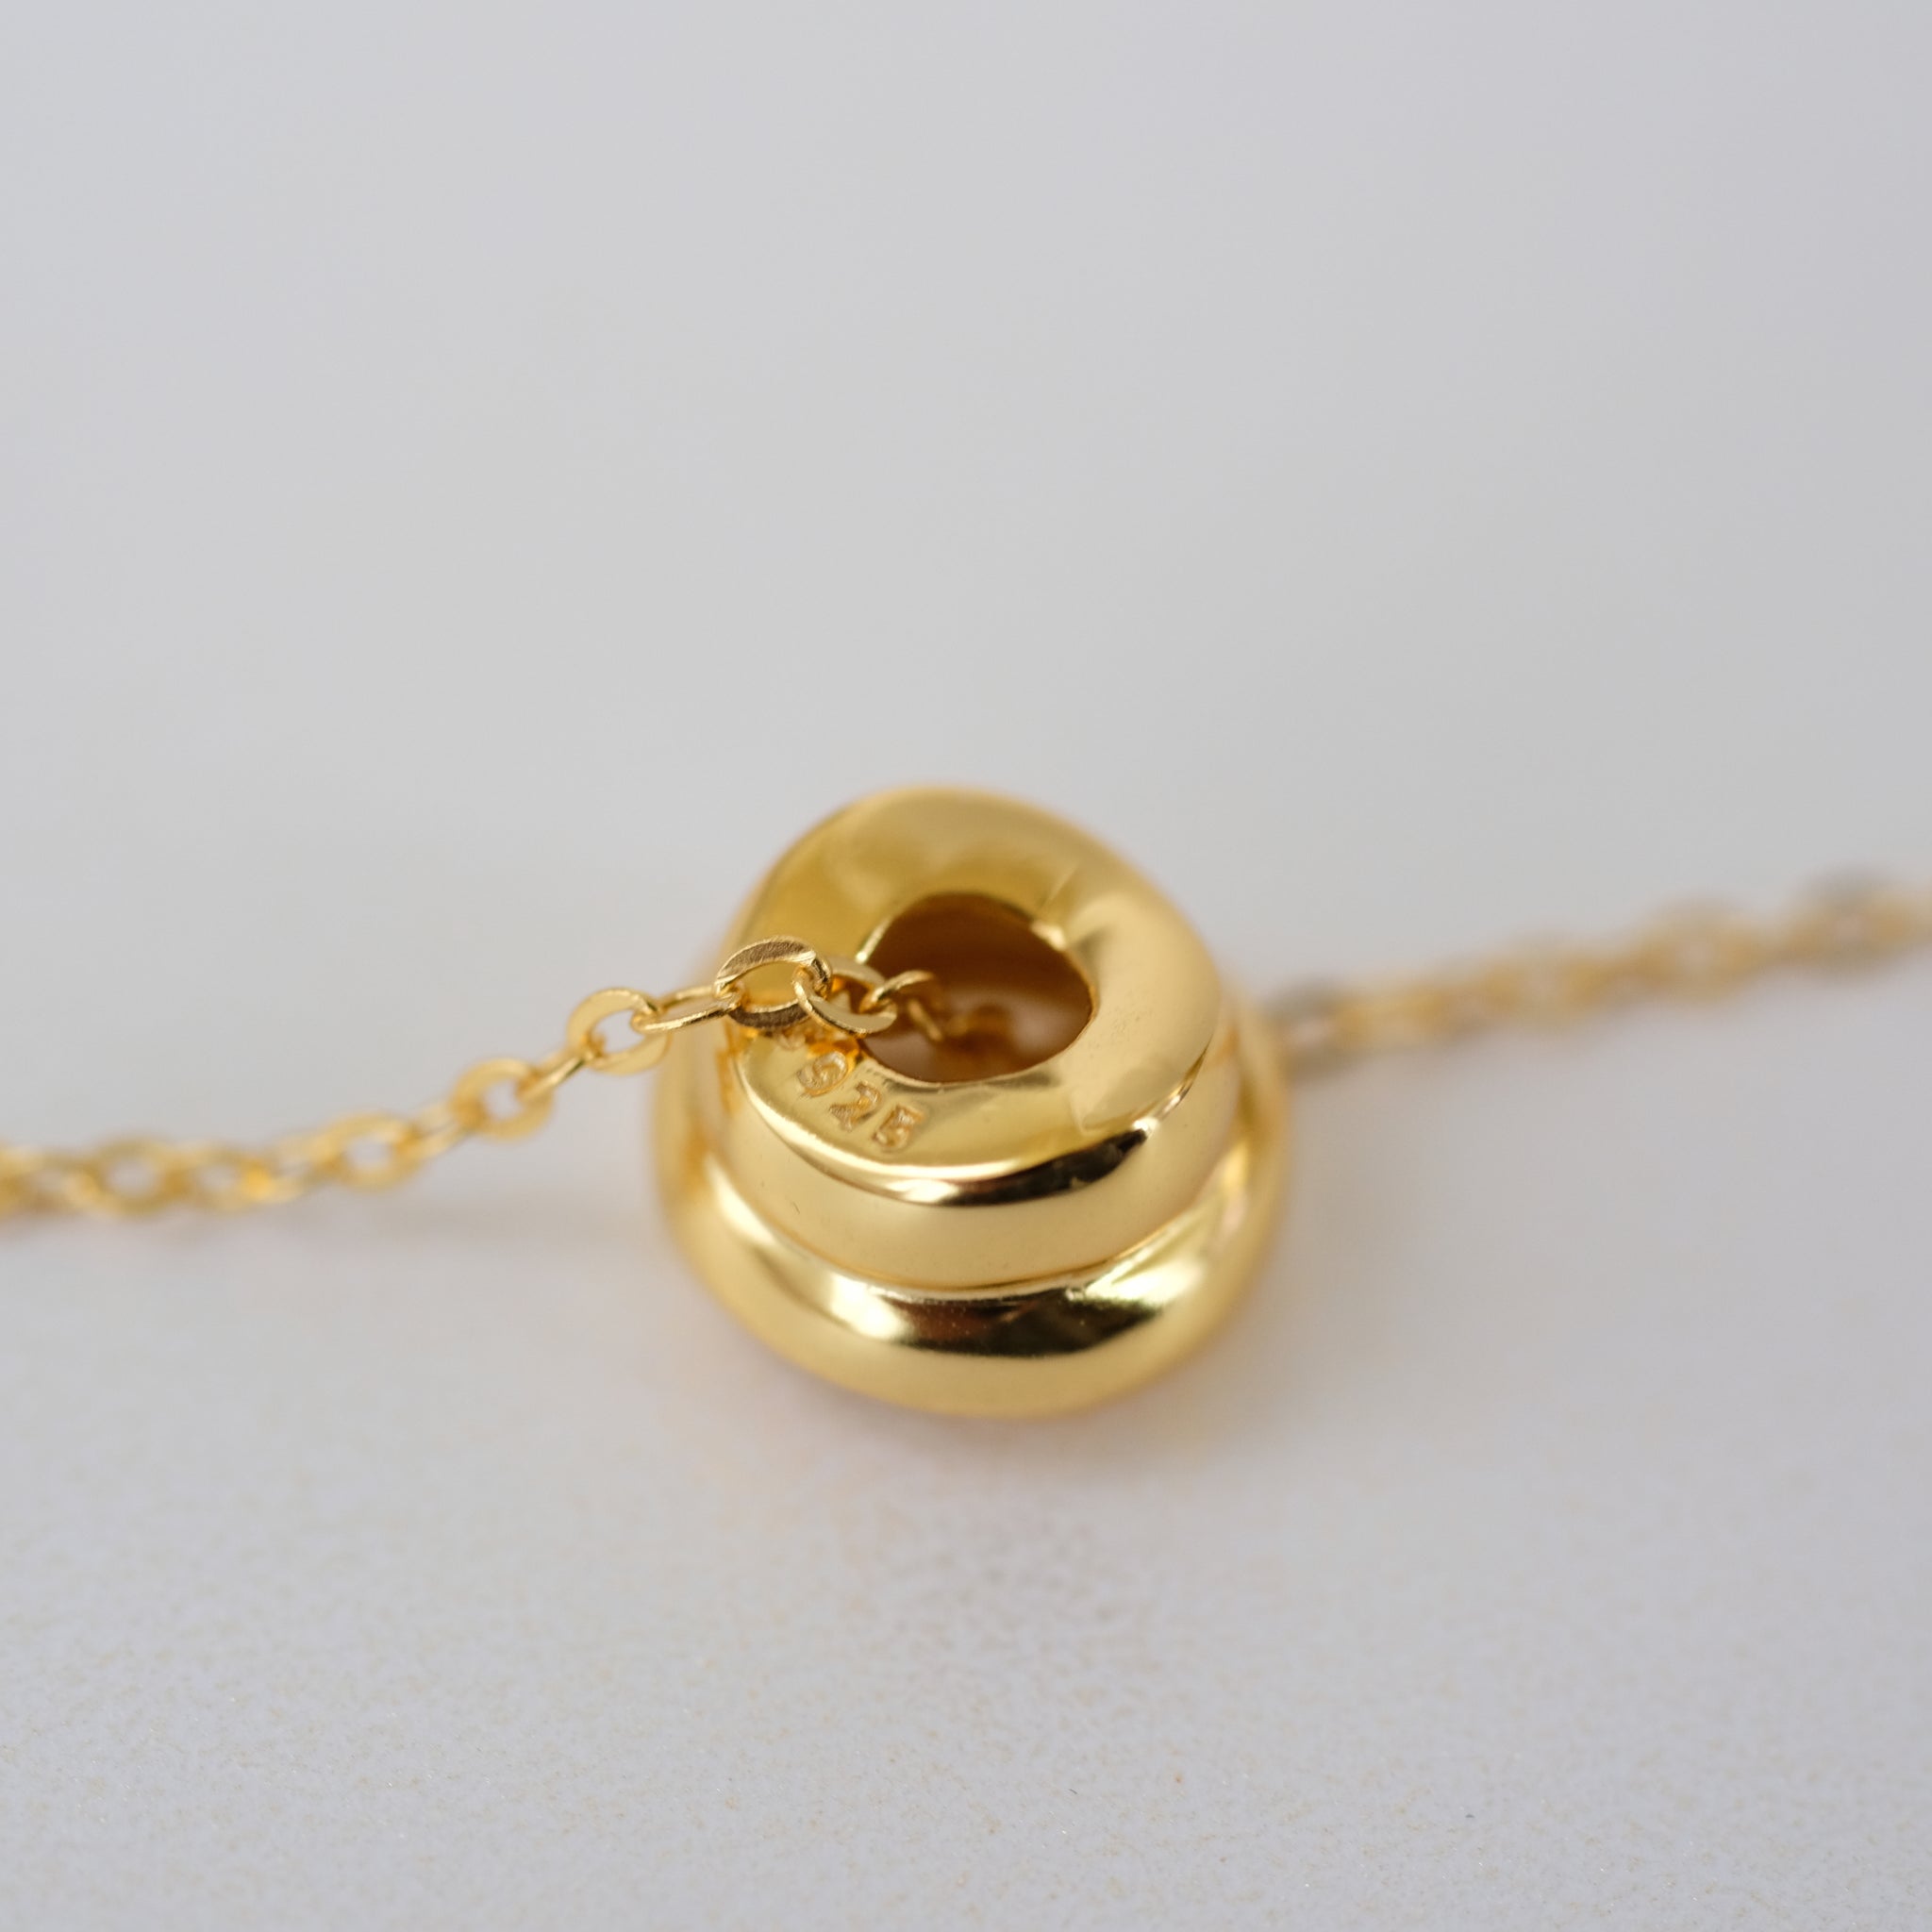 Gold Lucky Charms 16 Pendant Necklace